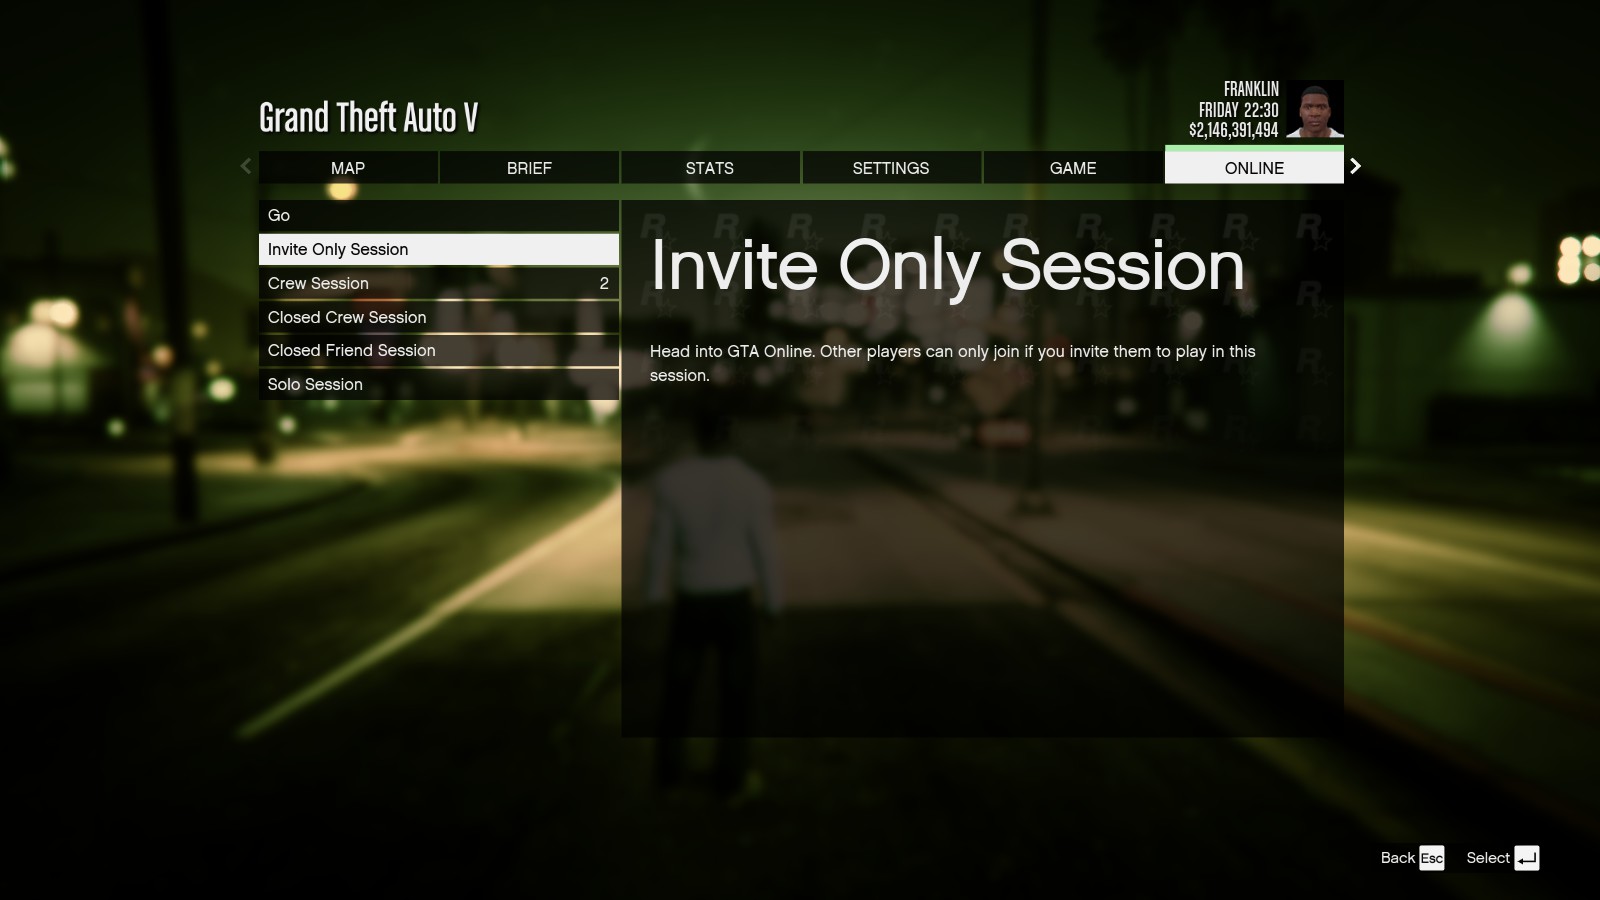 2. When you go into GTA Online, you have the option on the second menu to &...